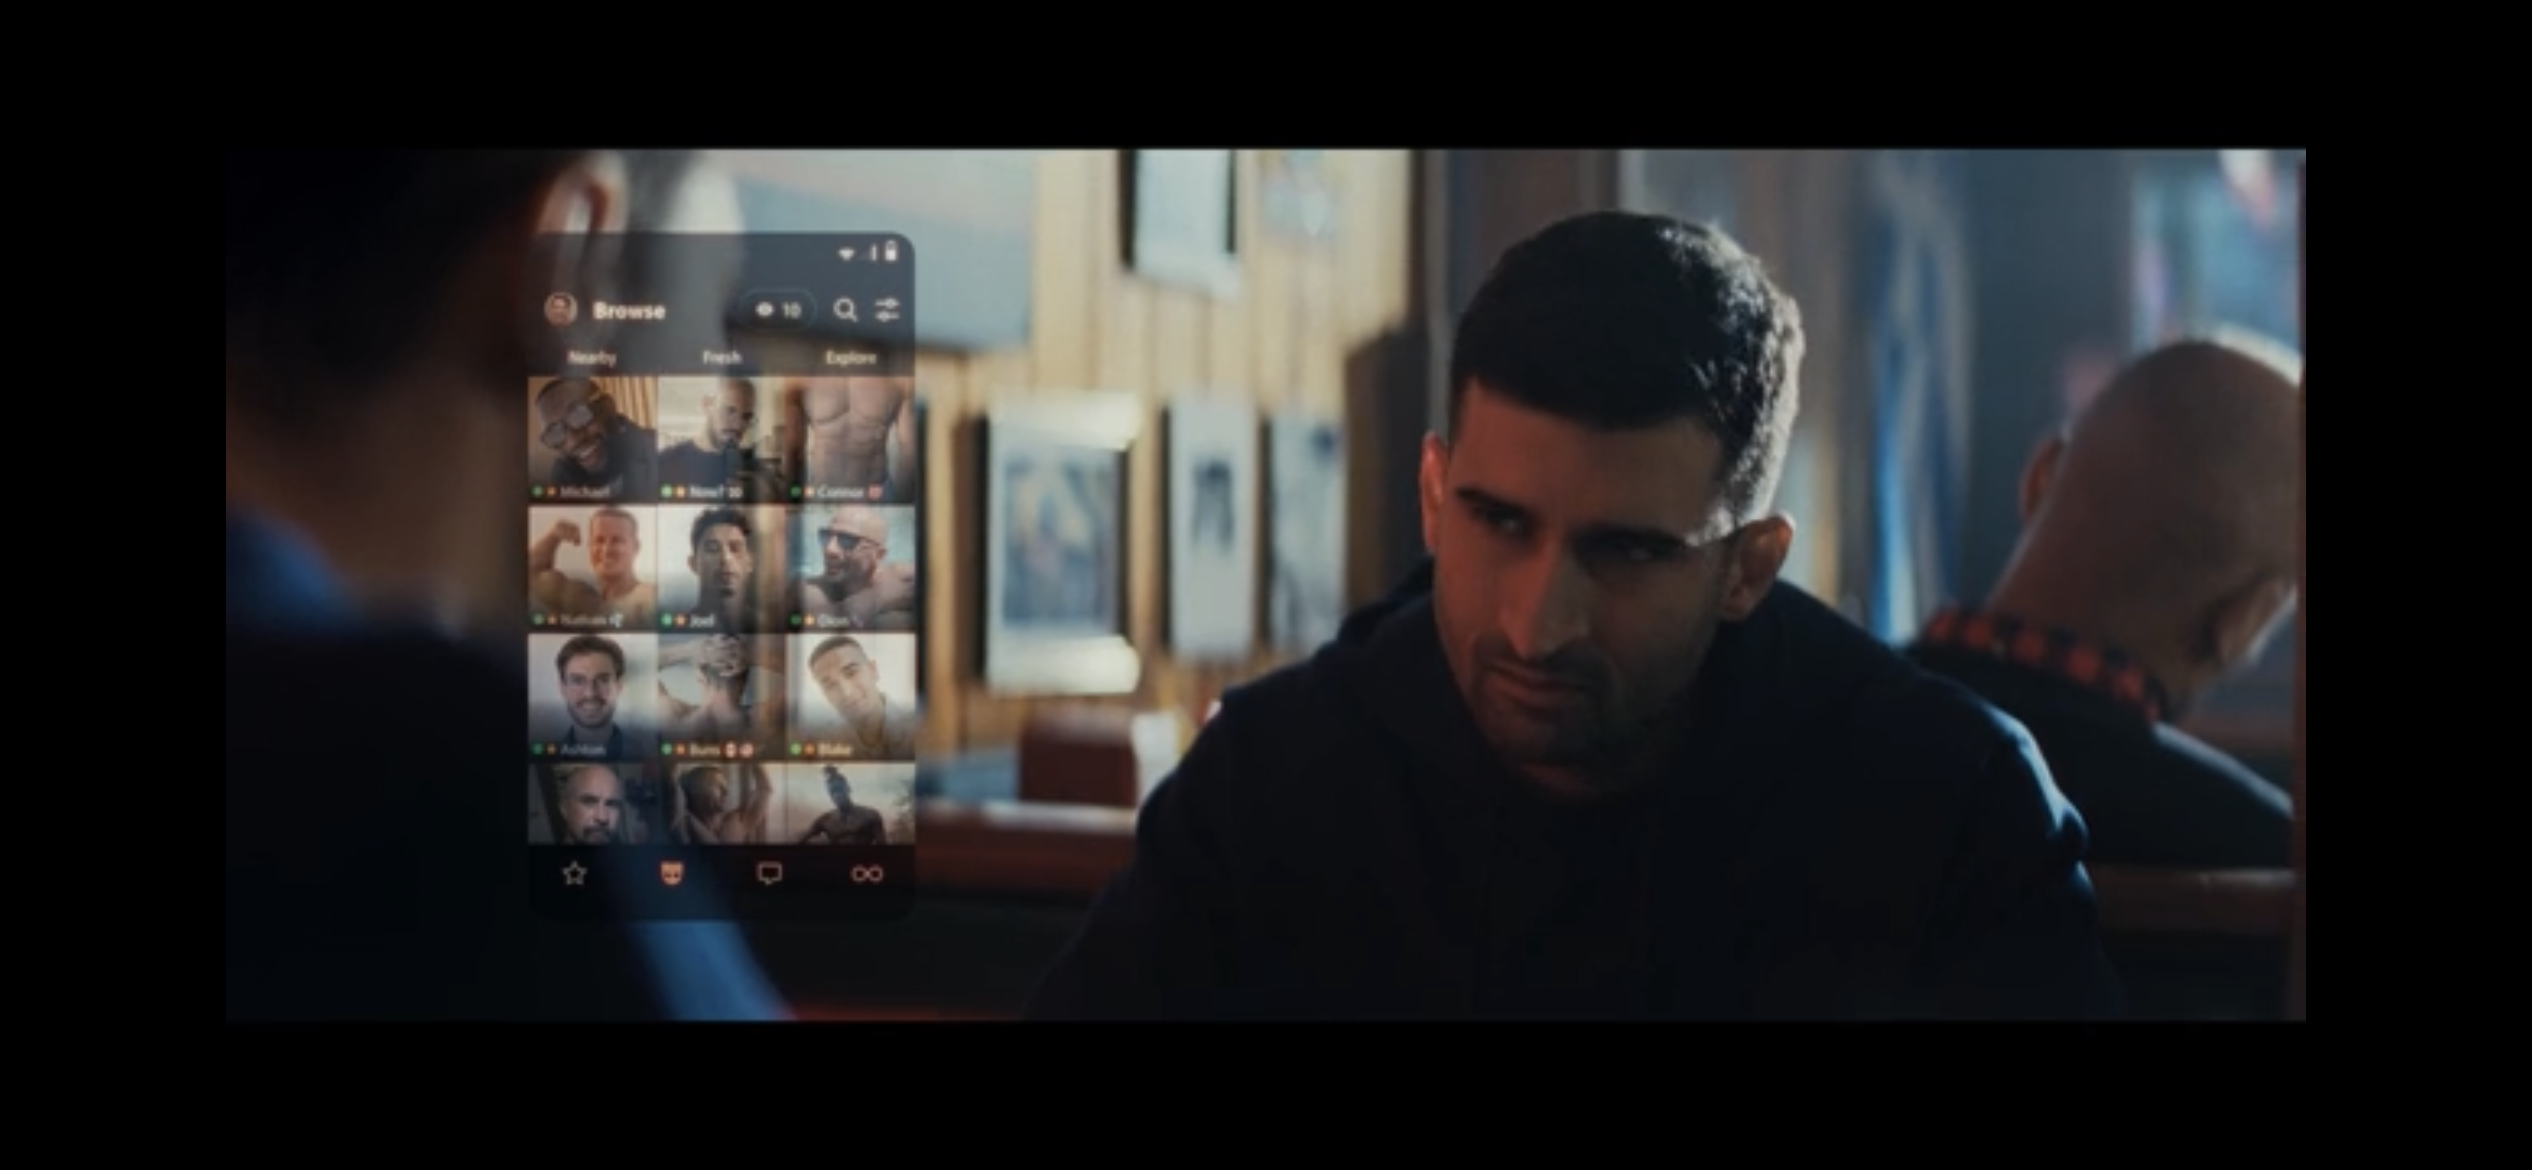 An upset man with Grindr images onscreen